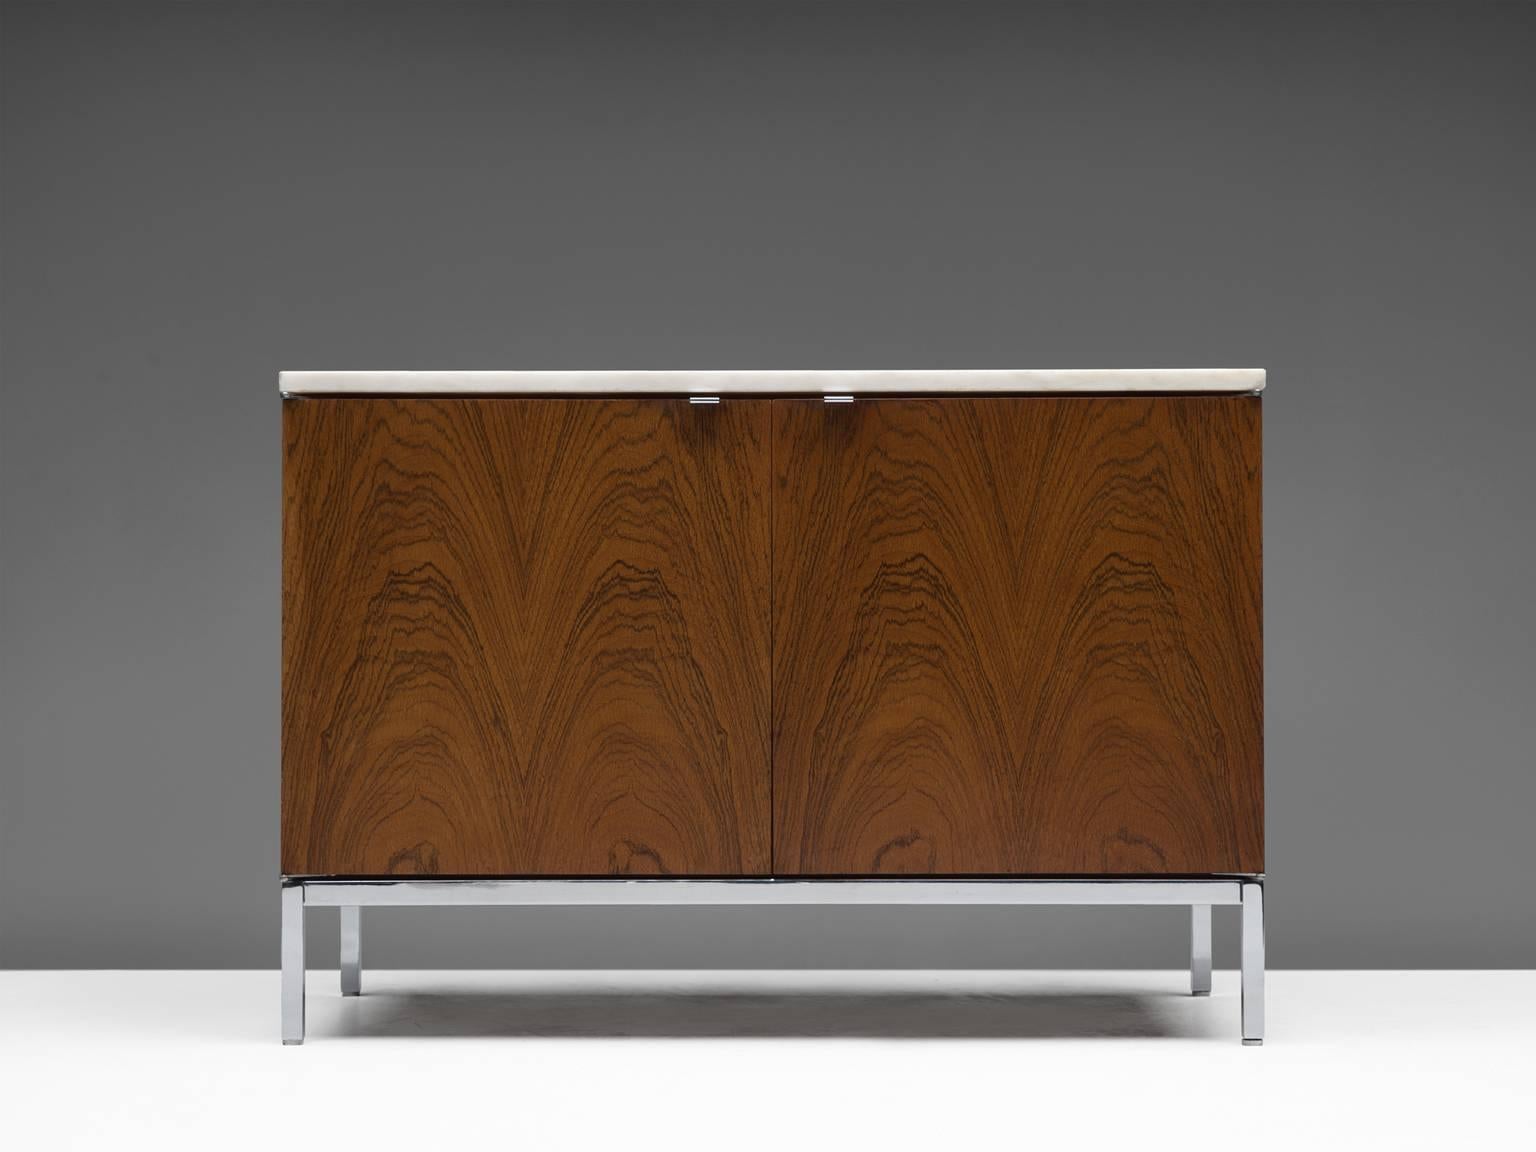 Sideboard, in rosewood, marble and metal by Florence Knoll for Knoll International, United States, 1961. 

This small credenza with chromed base is designed by Florence Knoll for Knoll International. This minimalistic designed credenza has